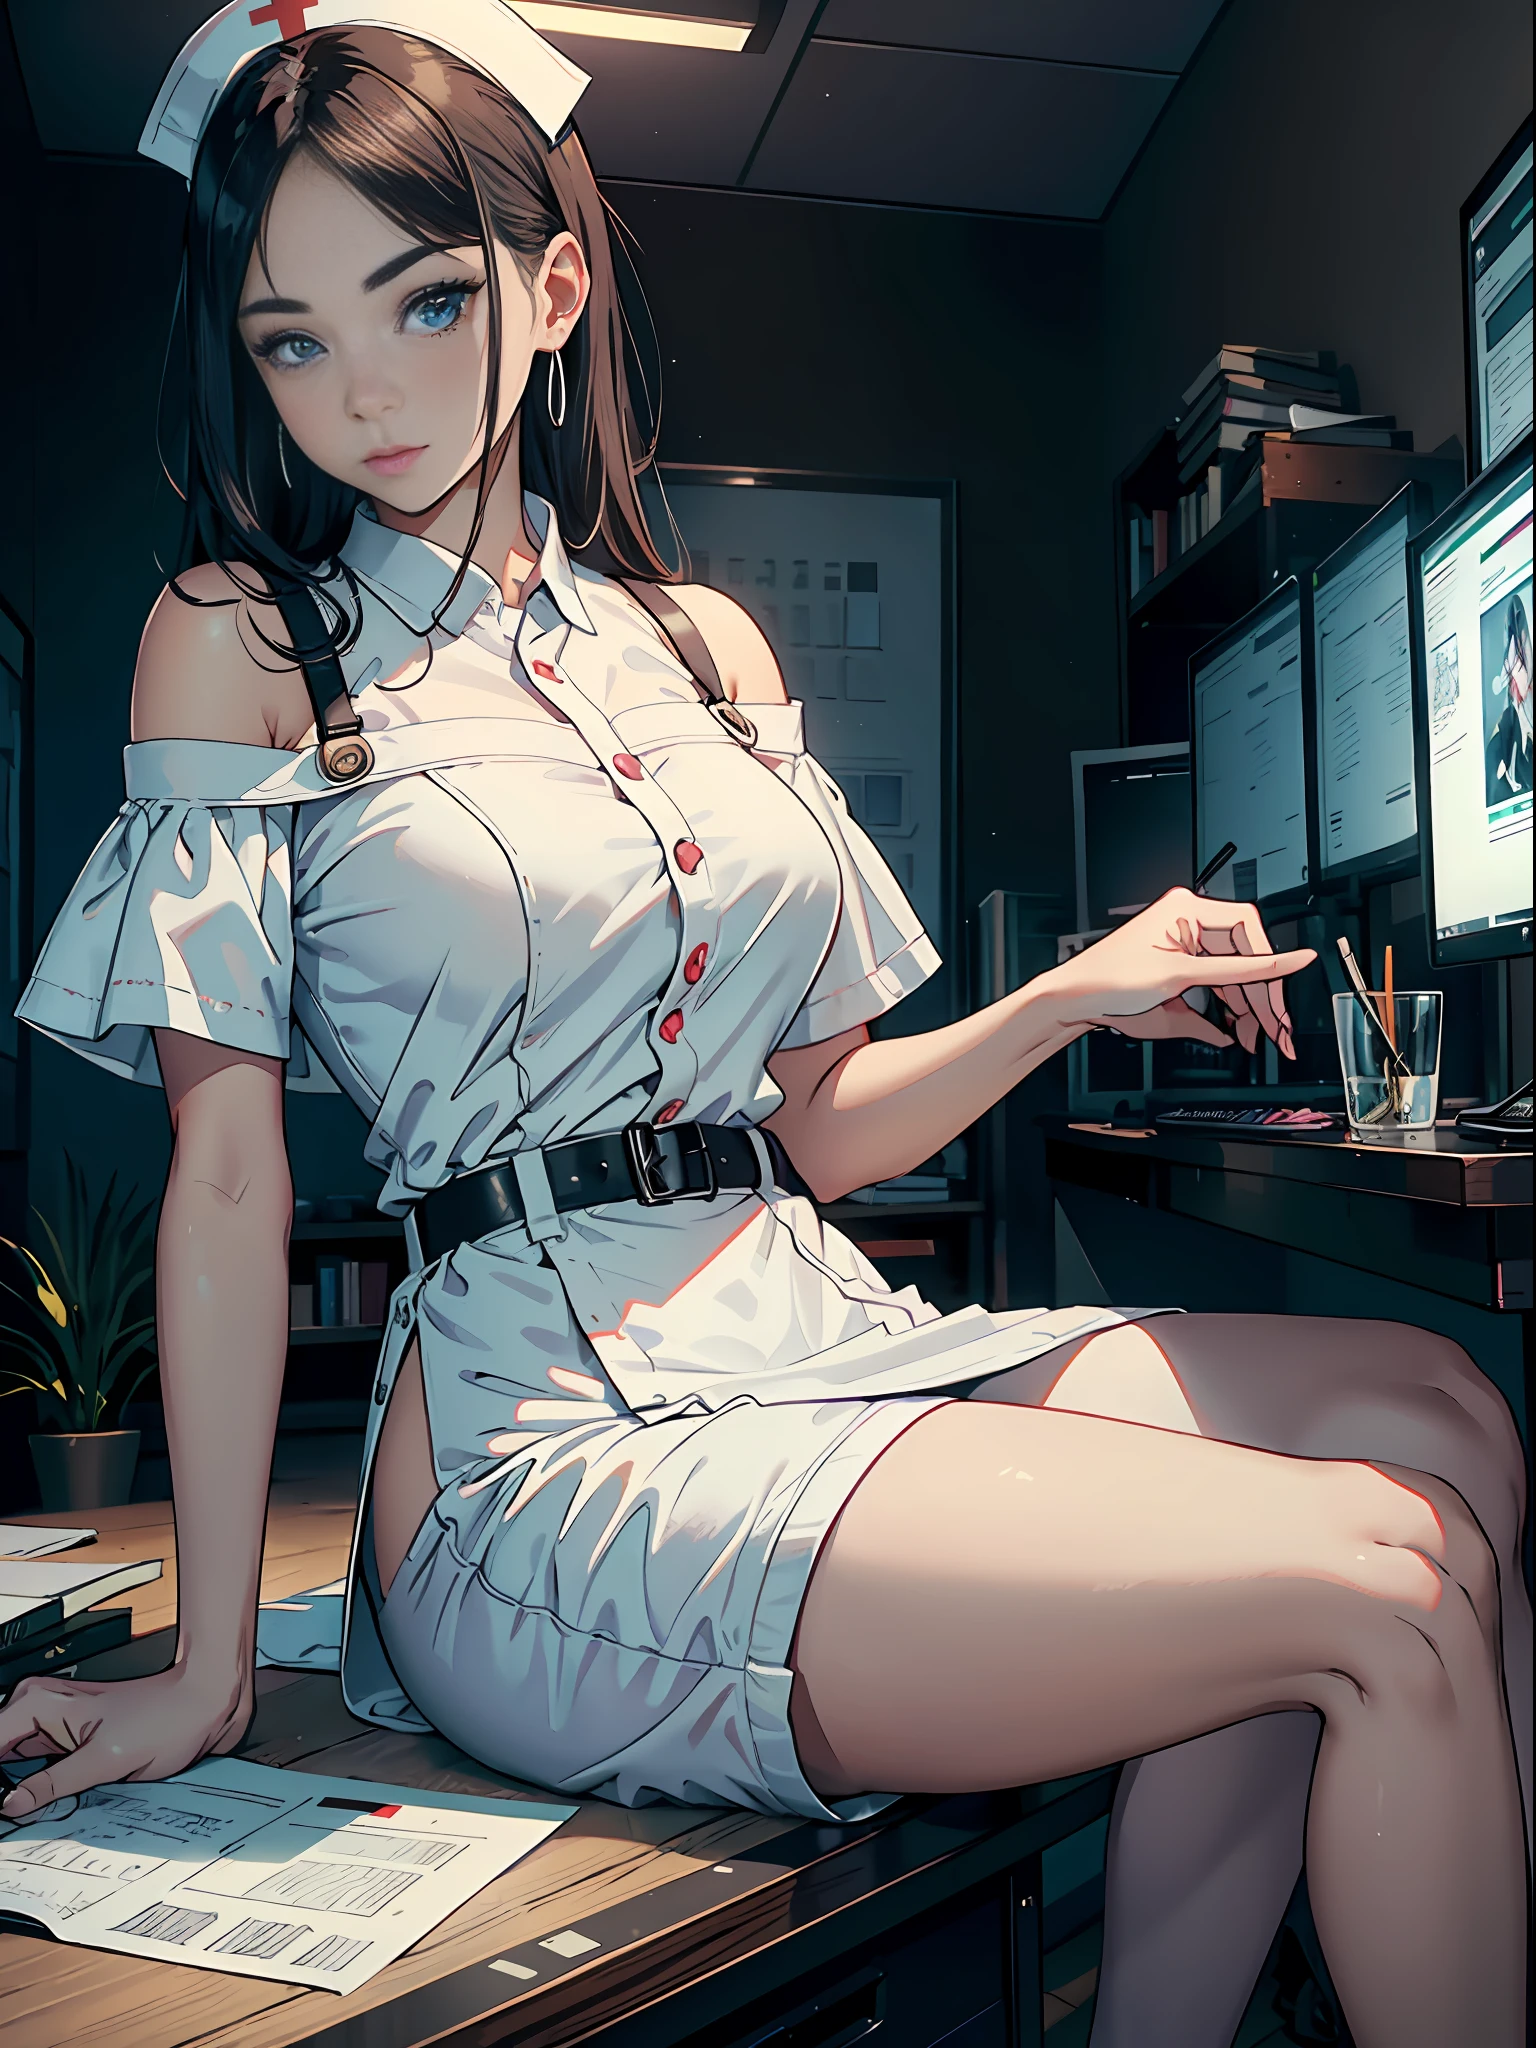 Woman who is reading and studying, young woman, computer in the room, mature looking, willow eyebrows, big eyes, woman with delicate facial features, woman sitting at the computer desk live broadcast, detail portrayal, infinite detail, Tyndall effect, ultra definition, 8K, character tracing, ray tracing, modern woman, high value, beauty, intellectual beauty, sexy seduction, (((wearing white nurse's uniform))), (urban beauty), (sexy), (seductive) (off-the-shoulder)